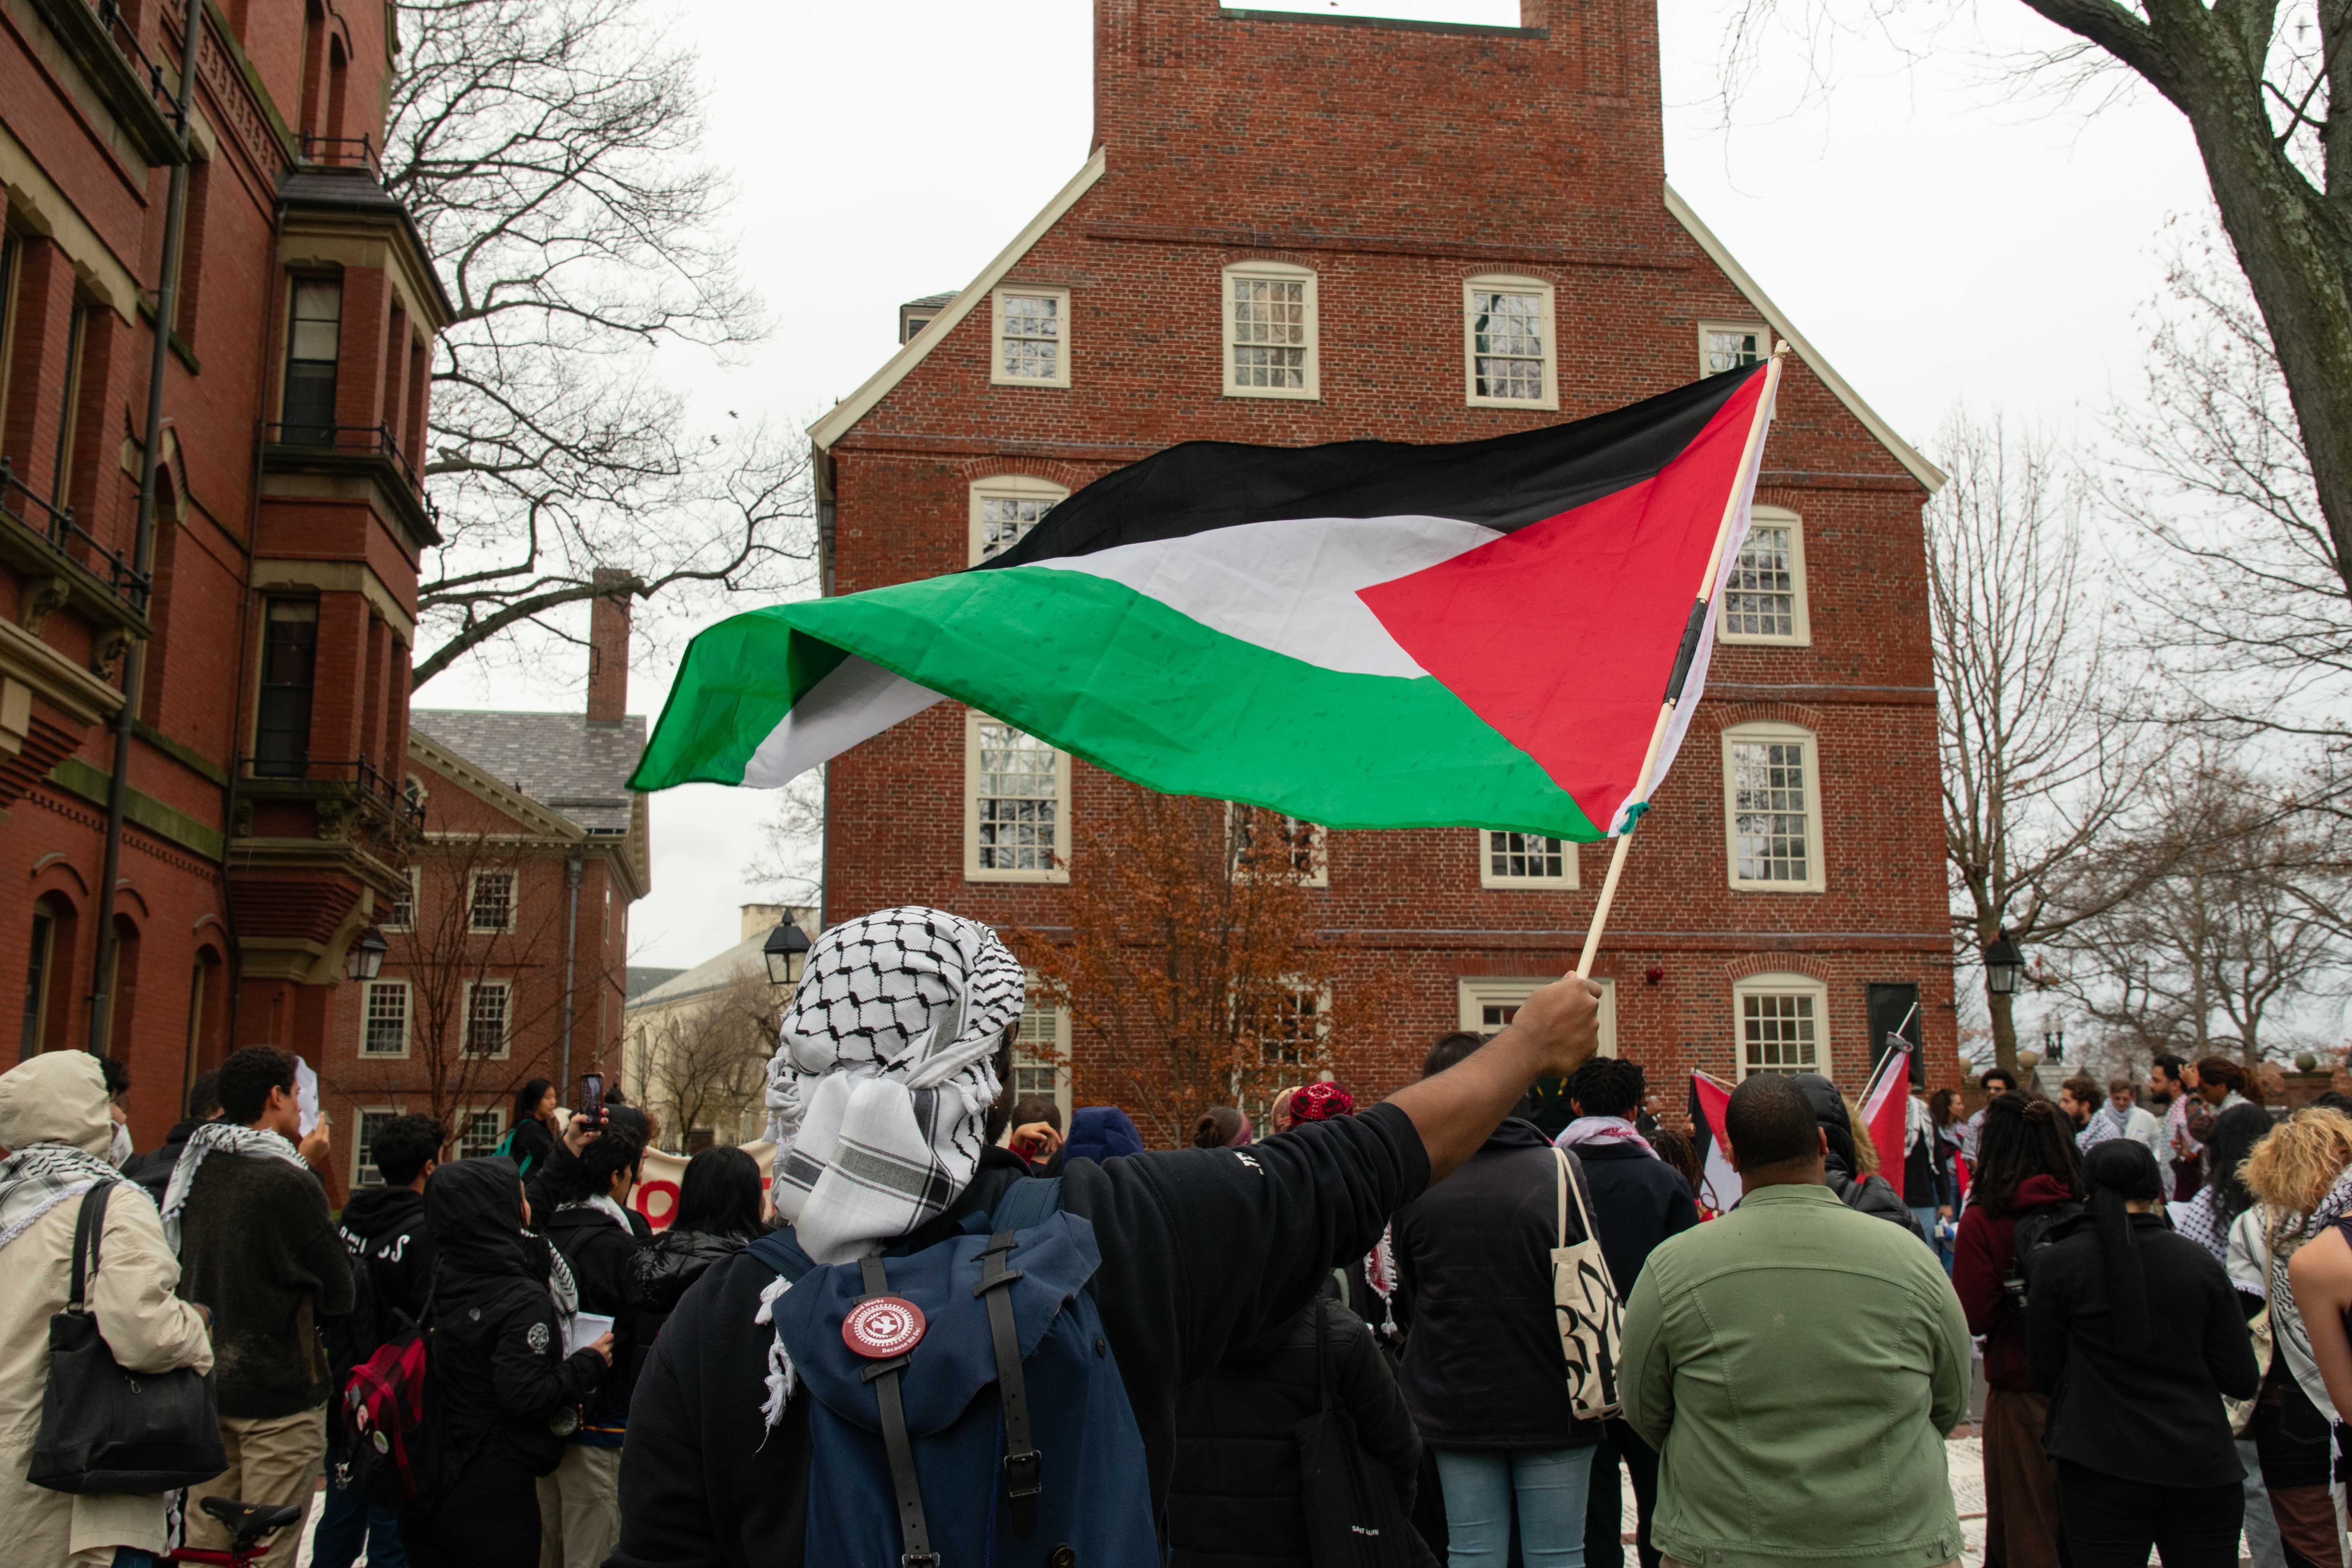 Massachusetts Hall during a protest.